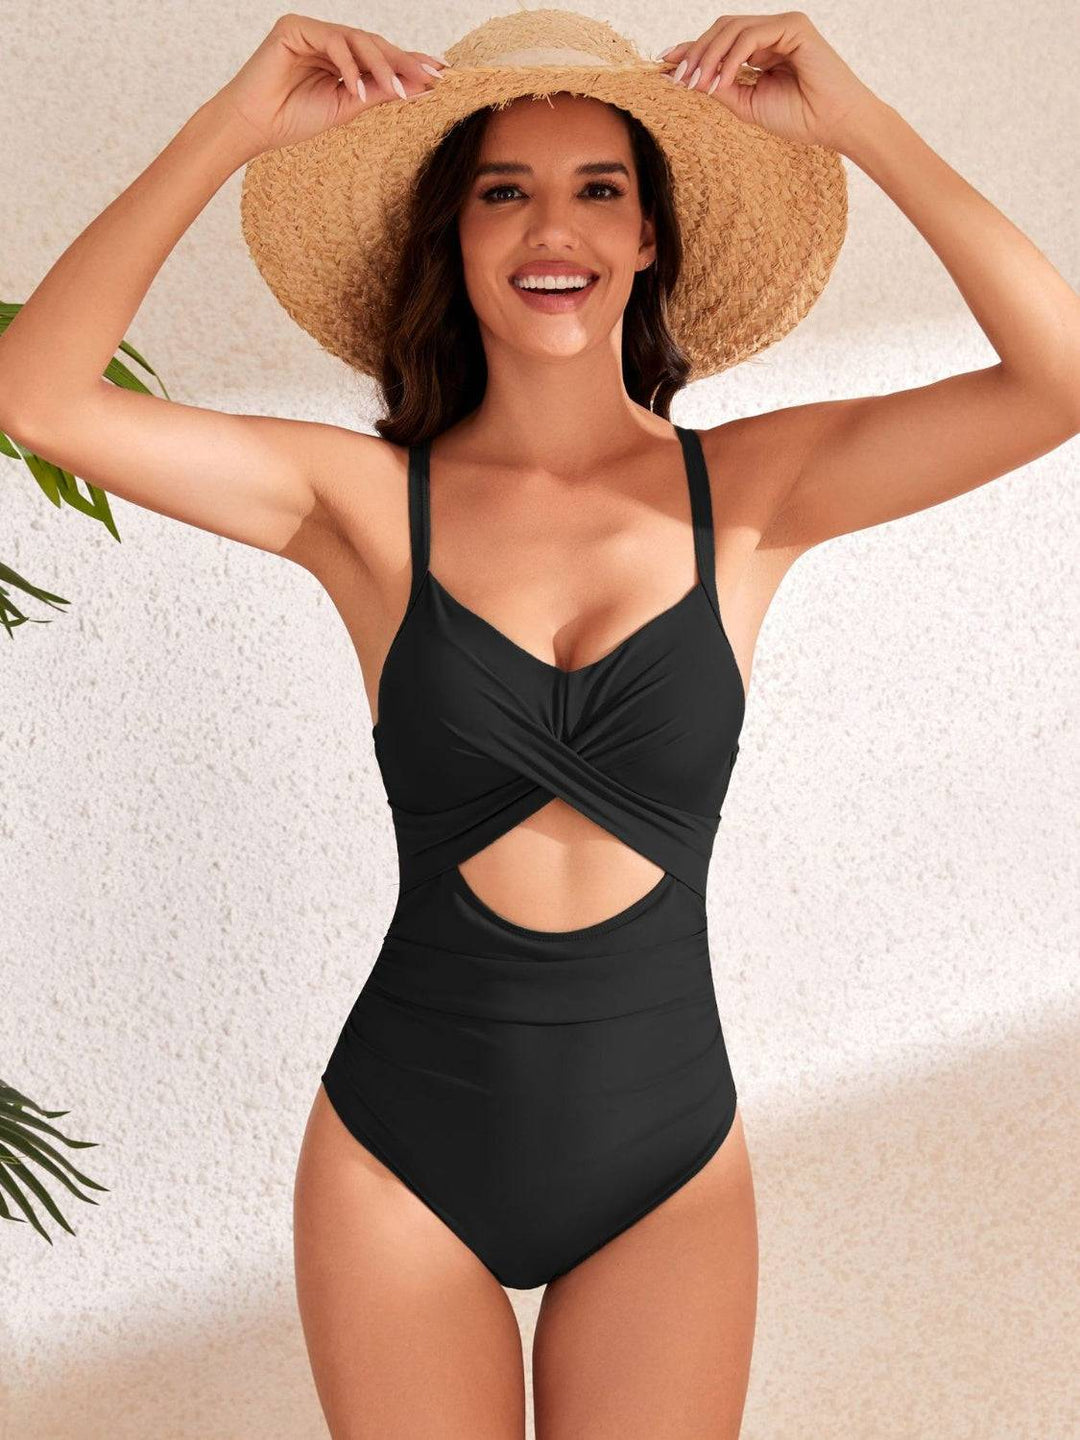 a woman wearing a black one piece swimsuit and a straw hat